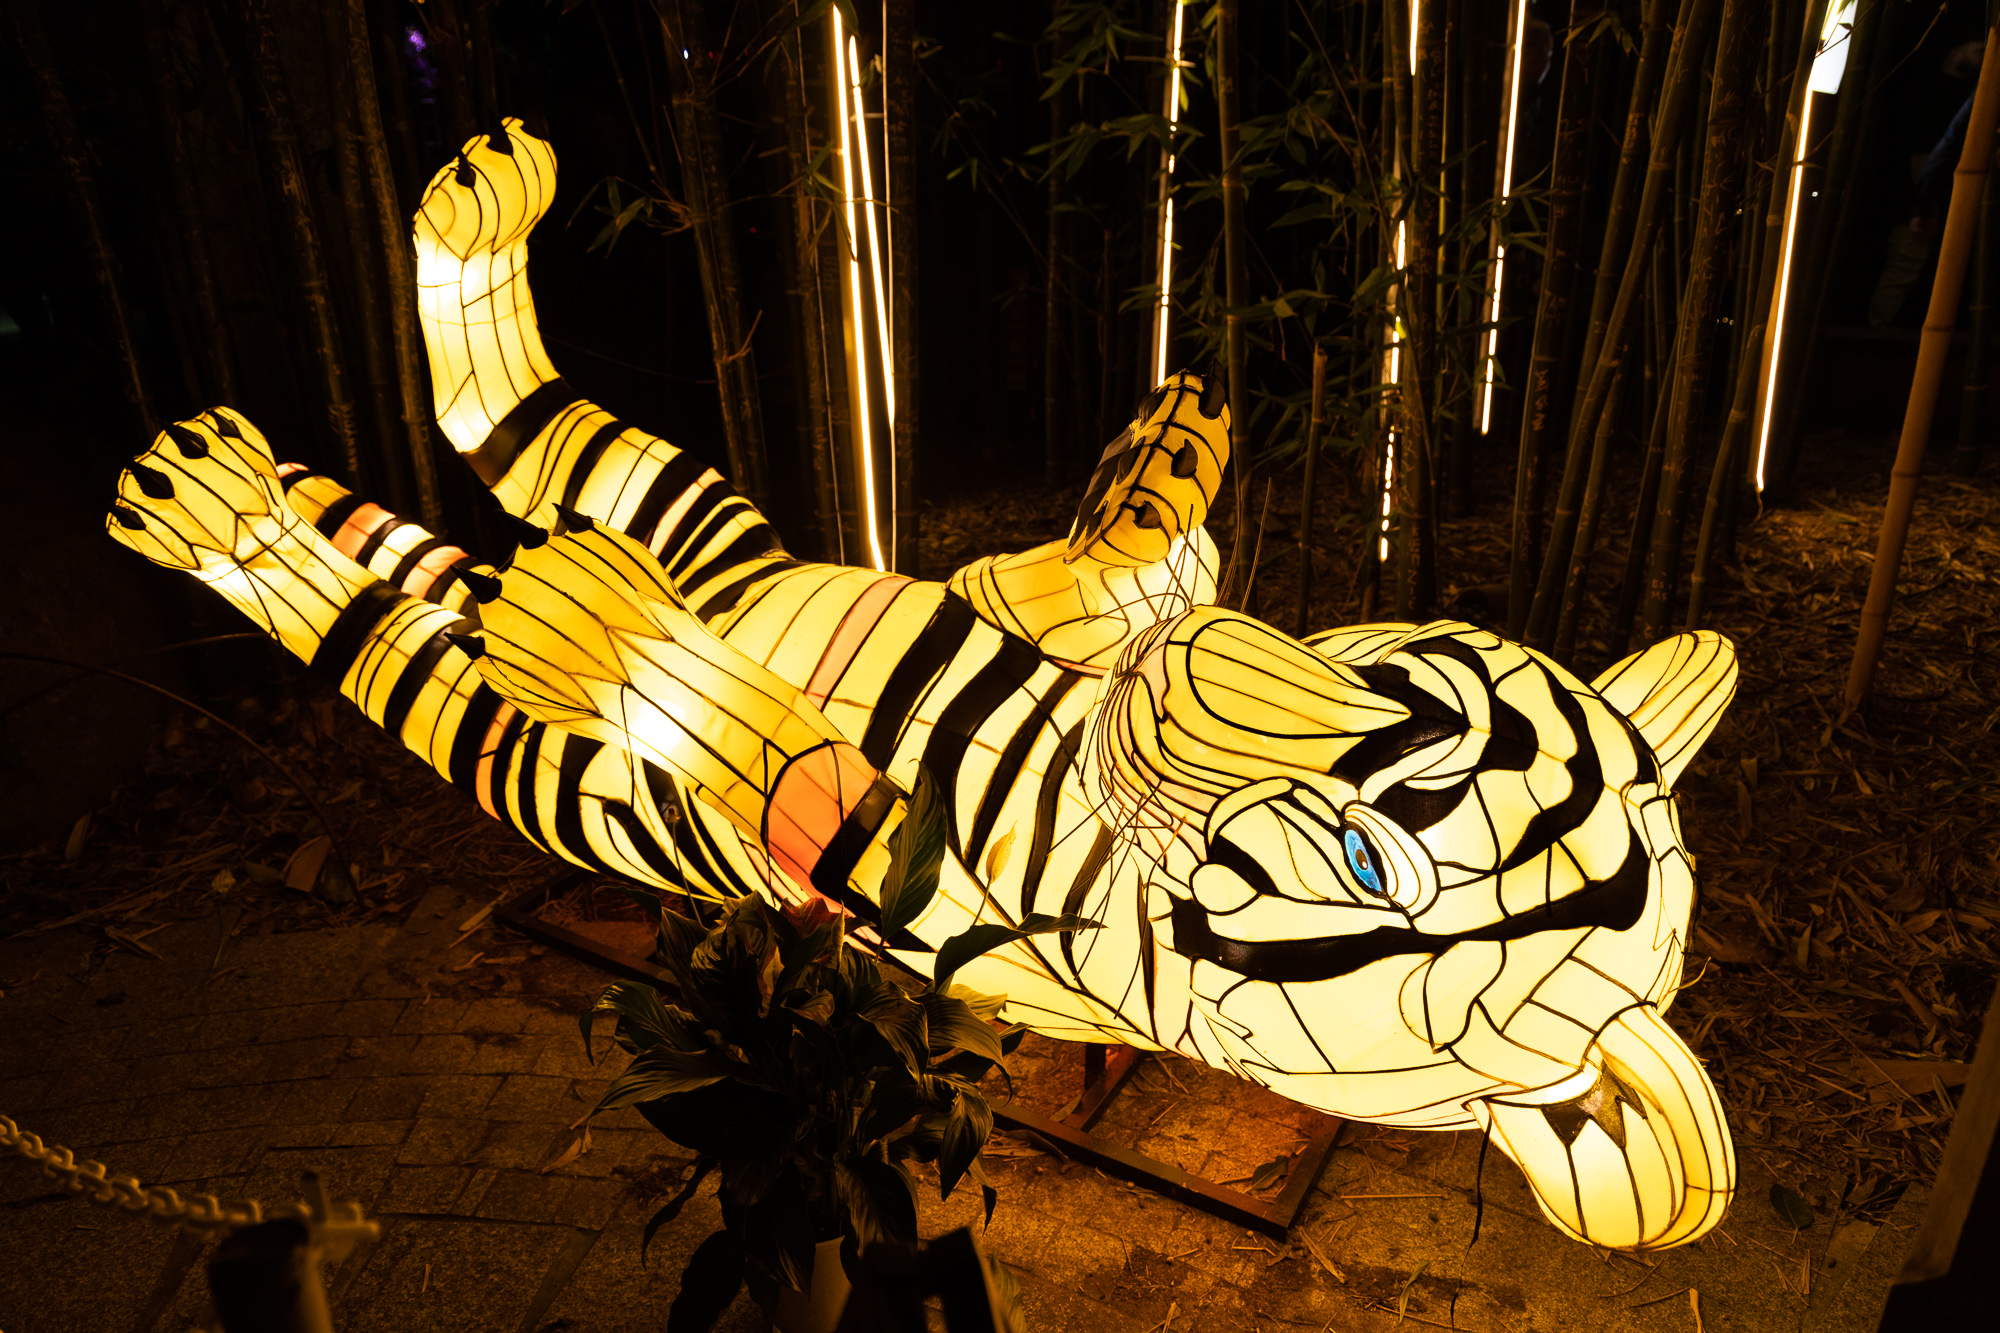 Light Creatures lantern of tiger cub at the Adelaide Zoo